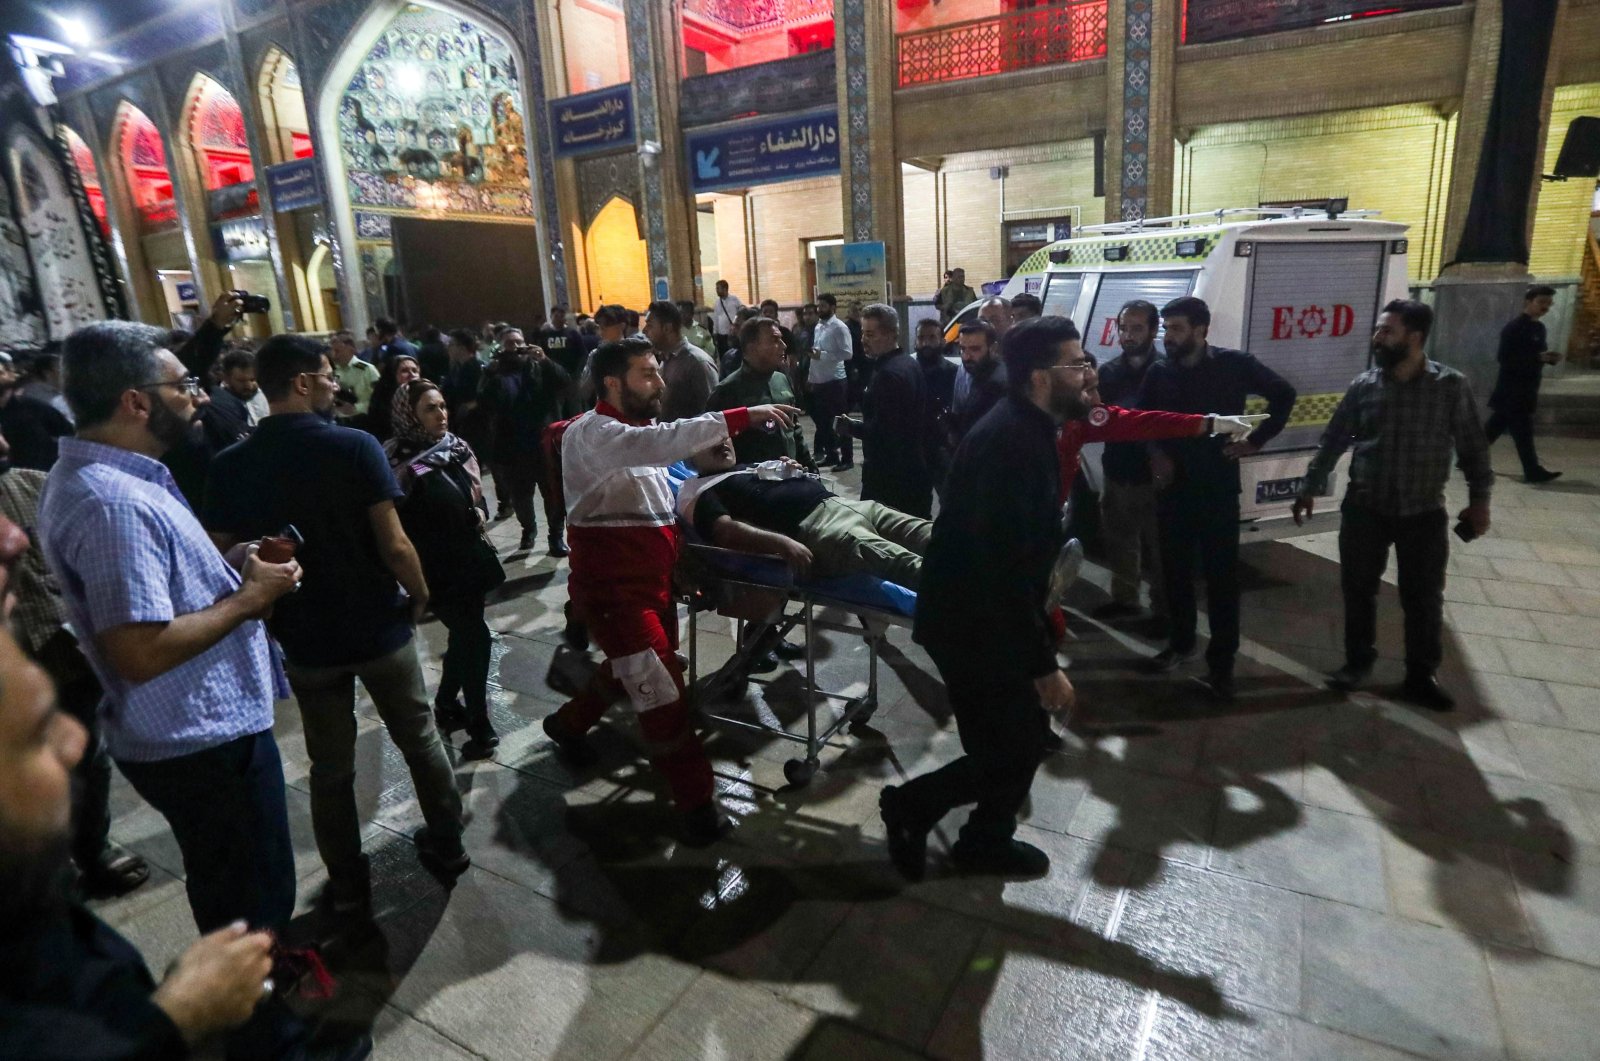 An injured person is carried away on a stretcher following a shooting at the Shah Cheragh shrine in Shiraz, Iran, Aug. 13, 2023. (EPA Photo)